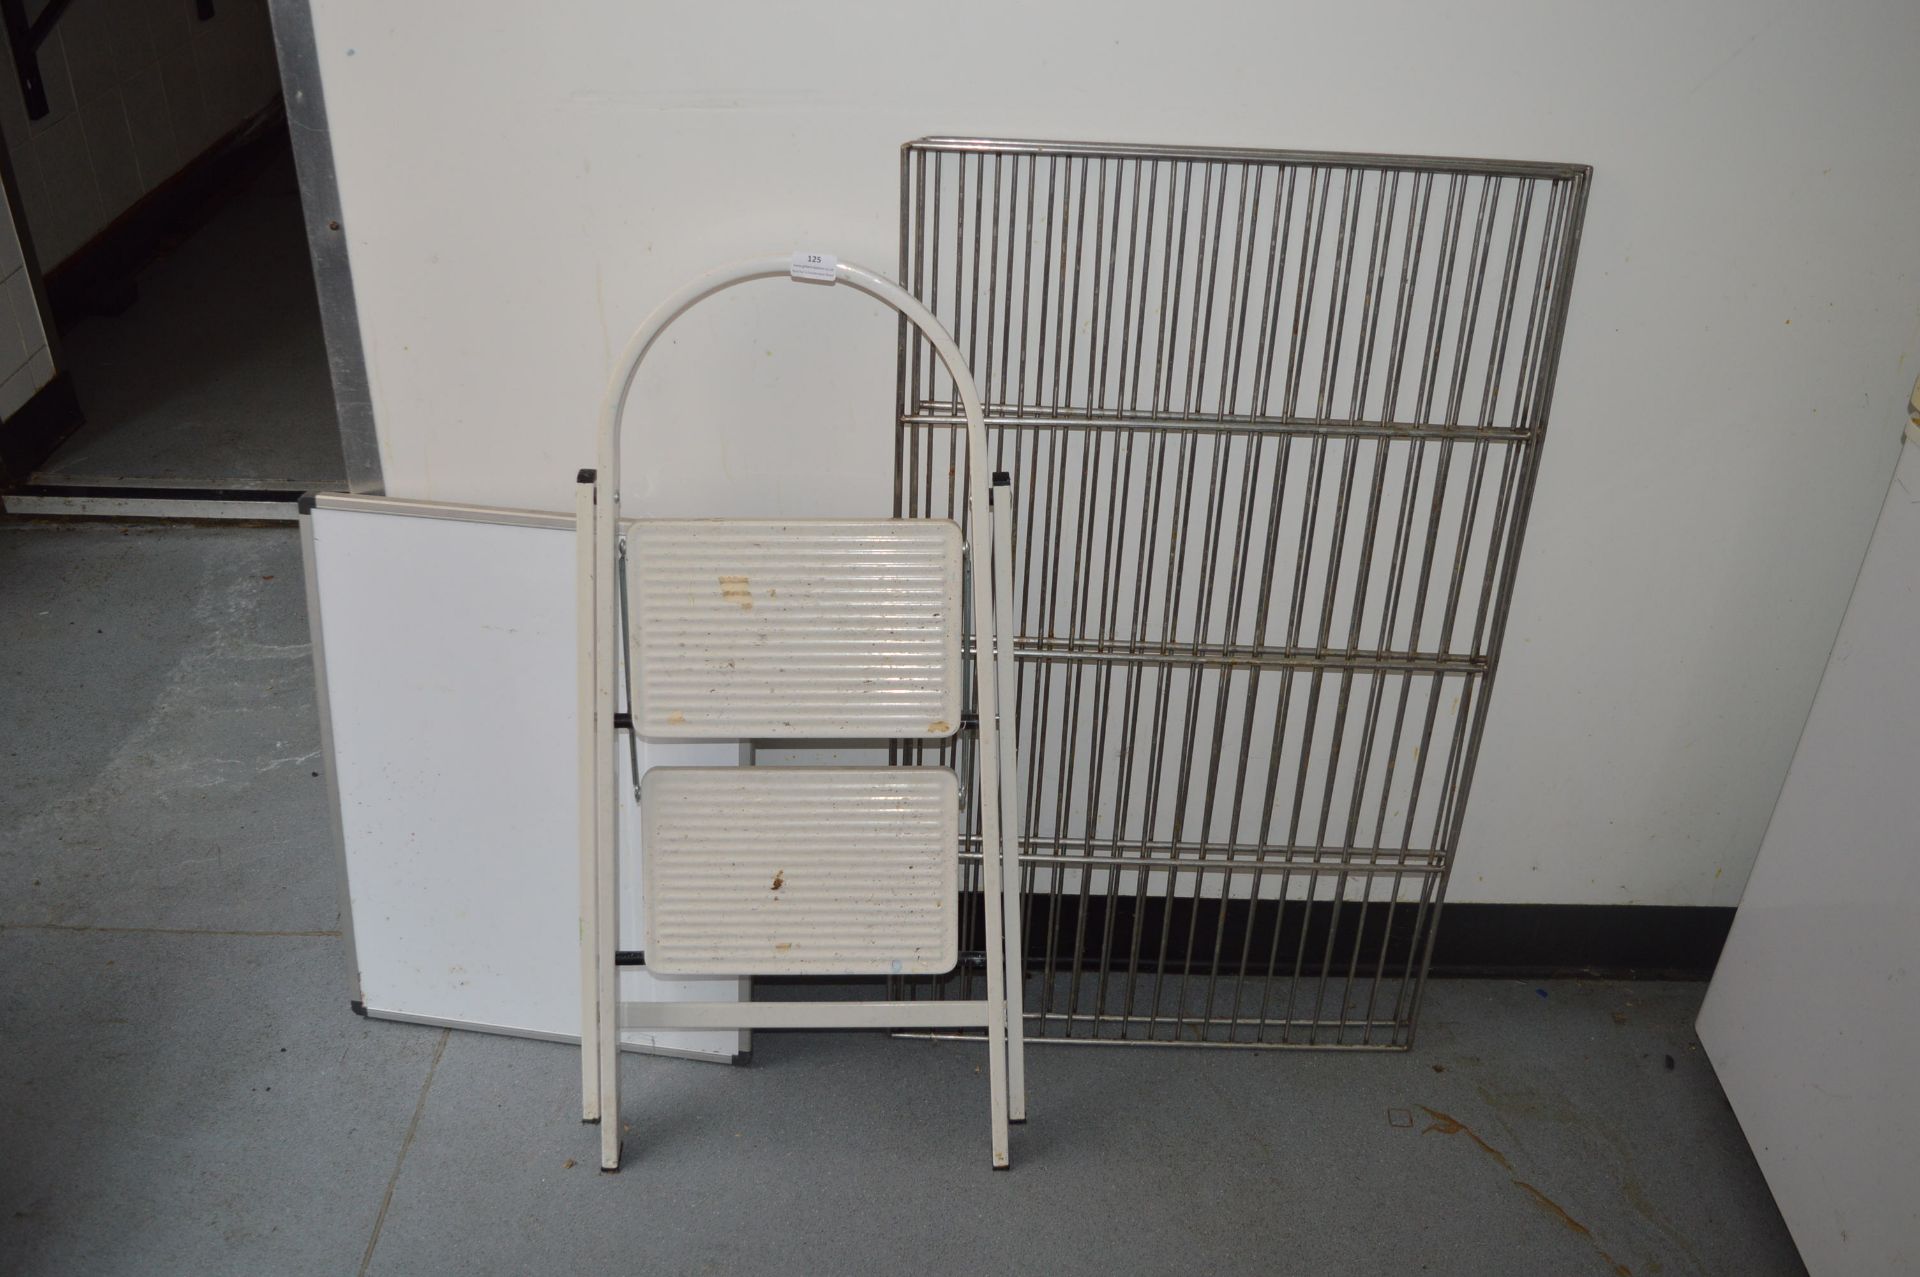 *Two Stainless Steel Wire Shelves, Set of Two Tread Steps, and a Dry Wipe Board